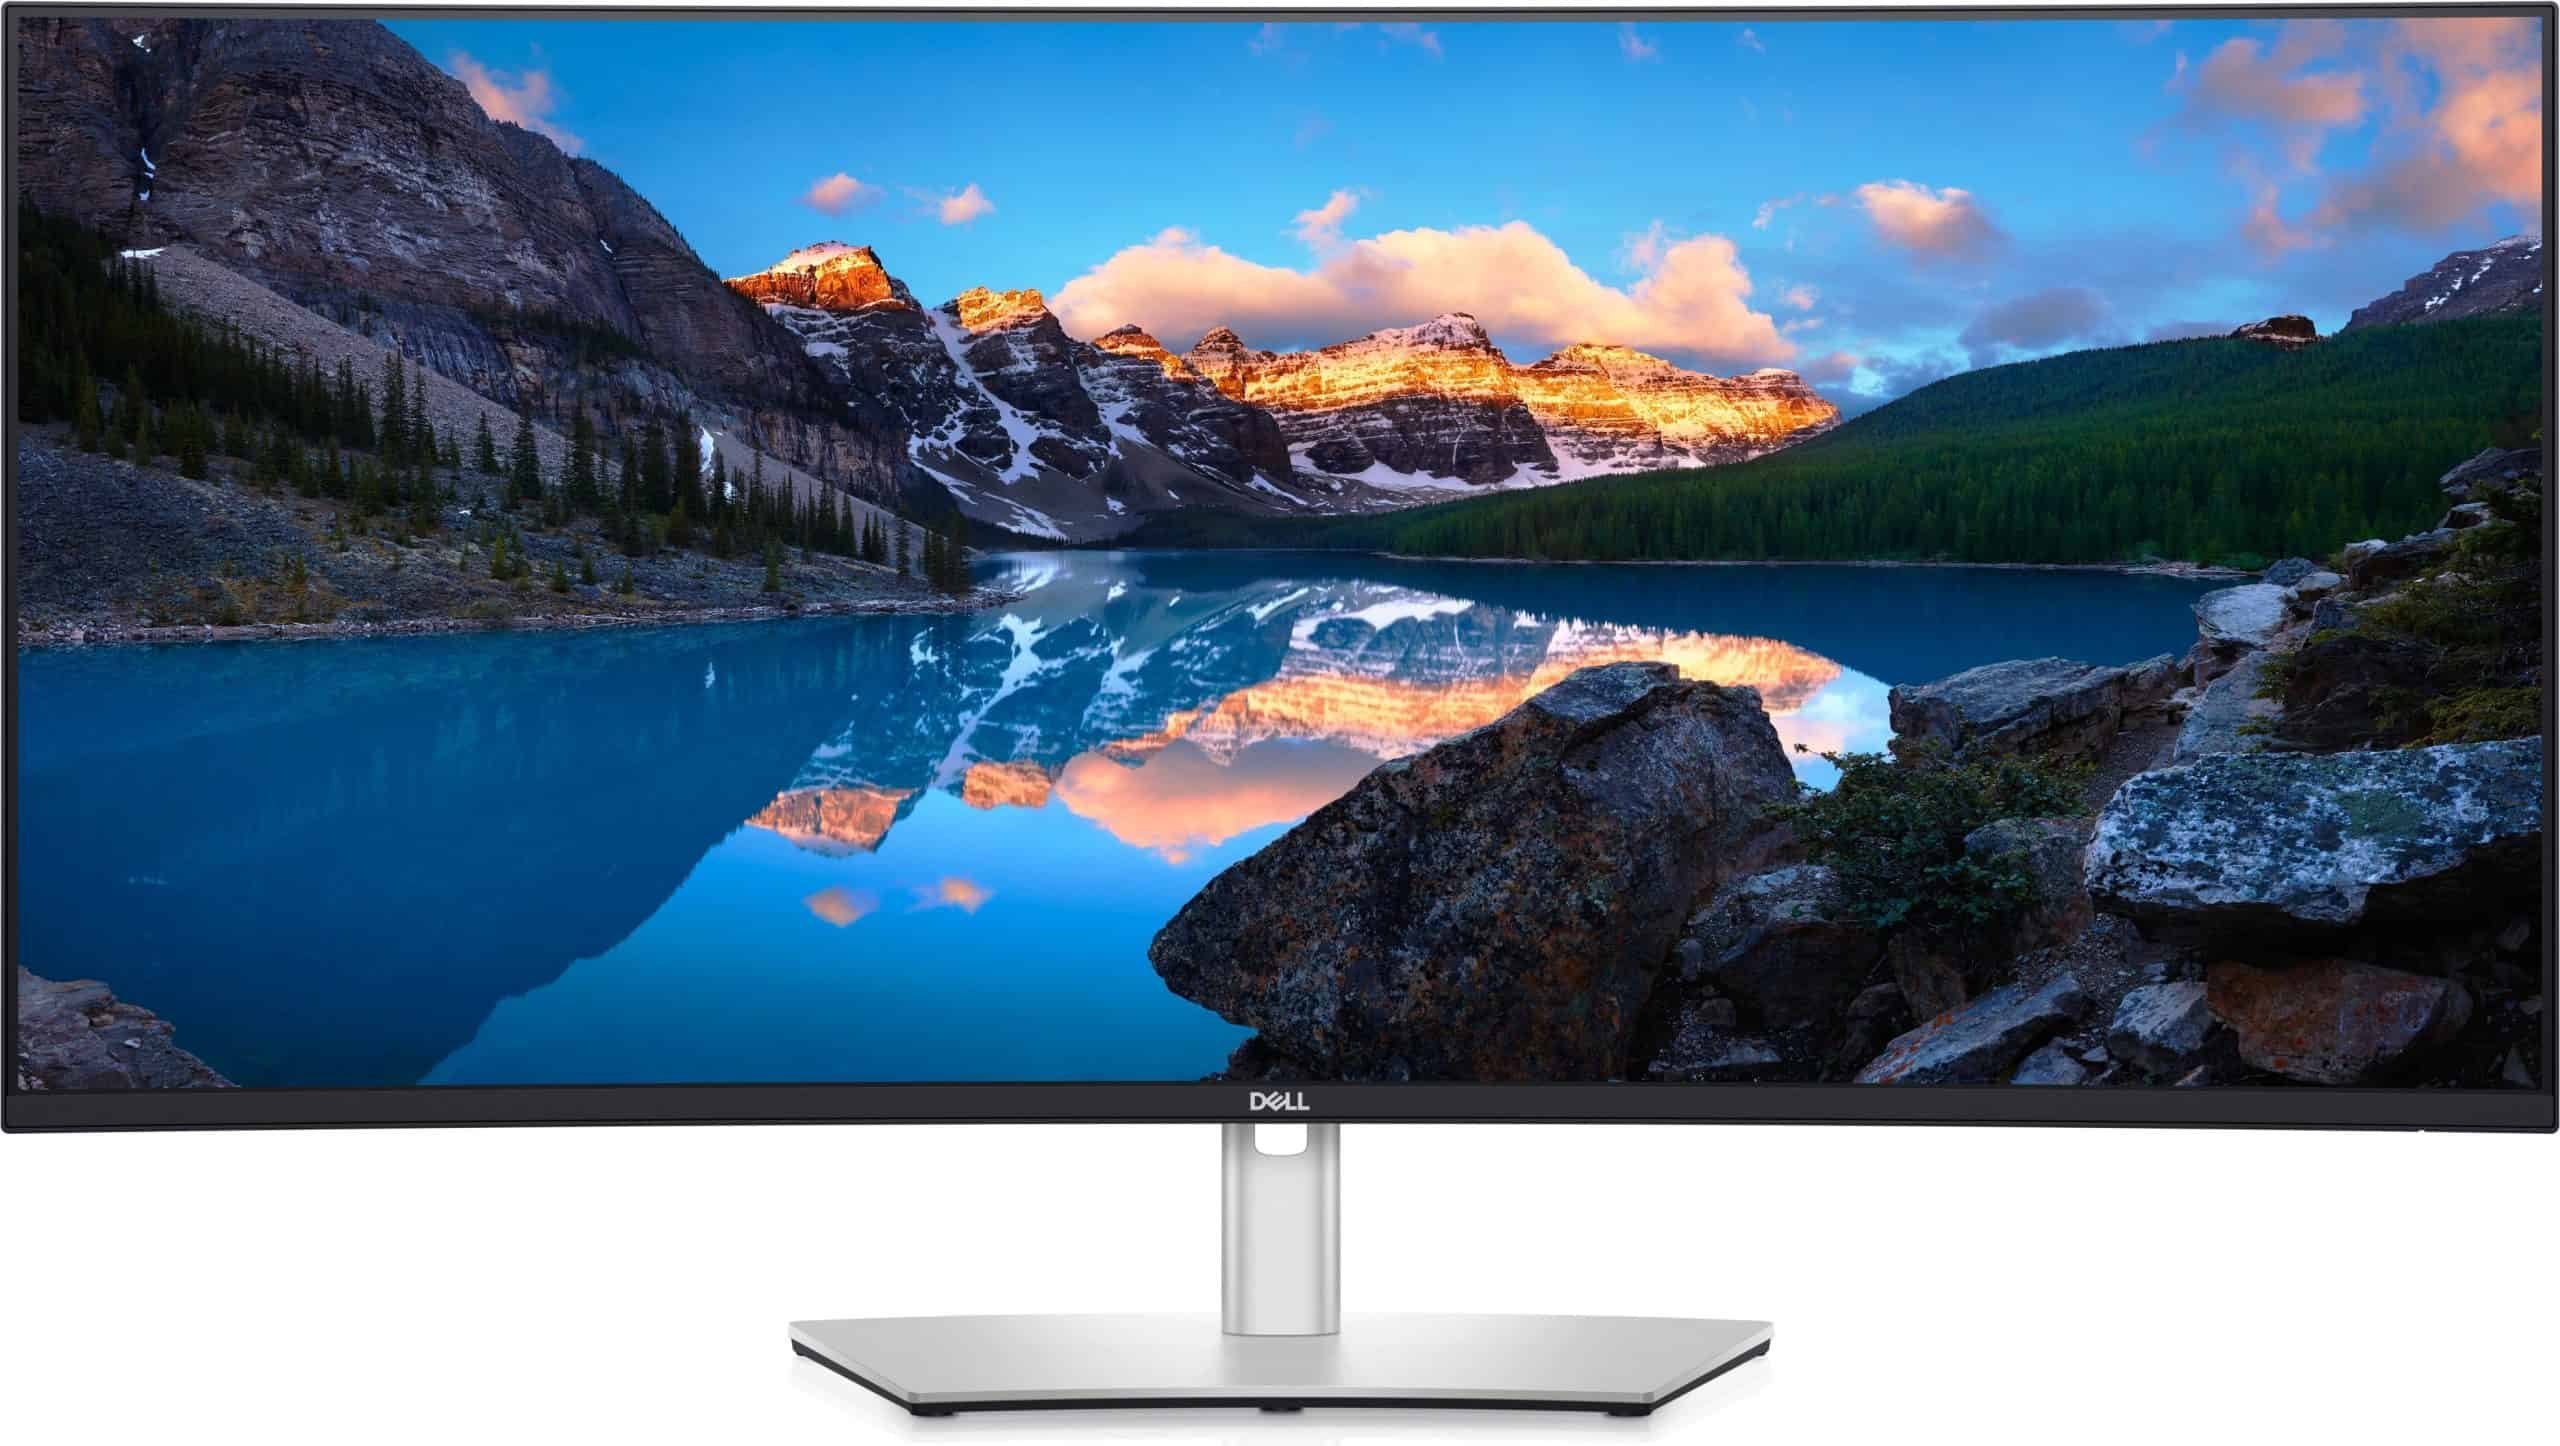 The Dell UltraSharp 40 Curved Monitor